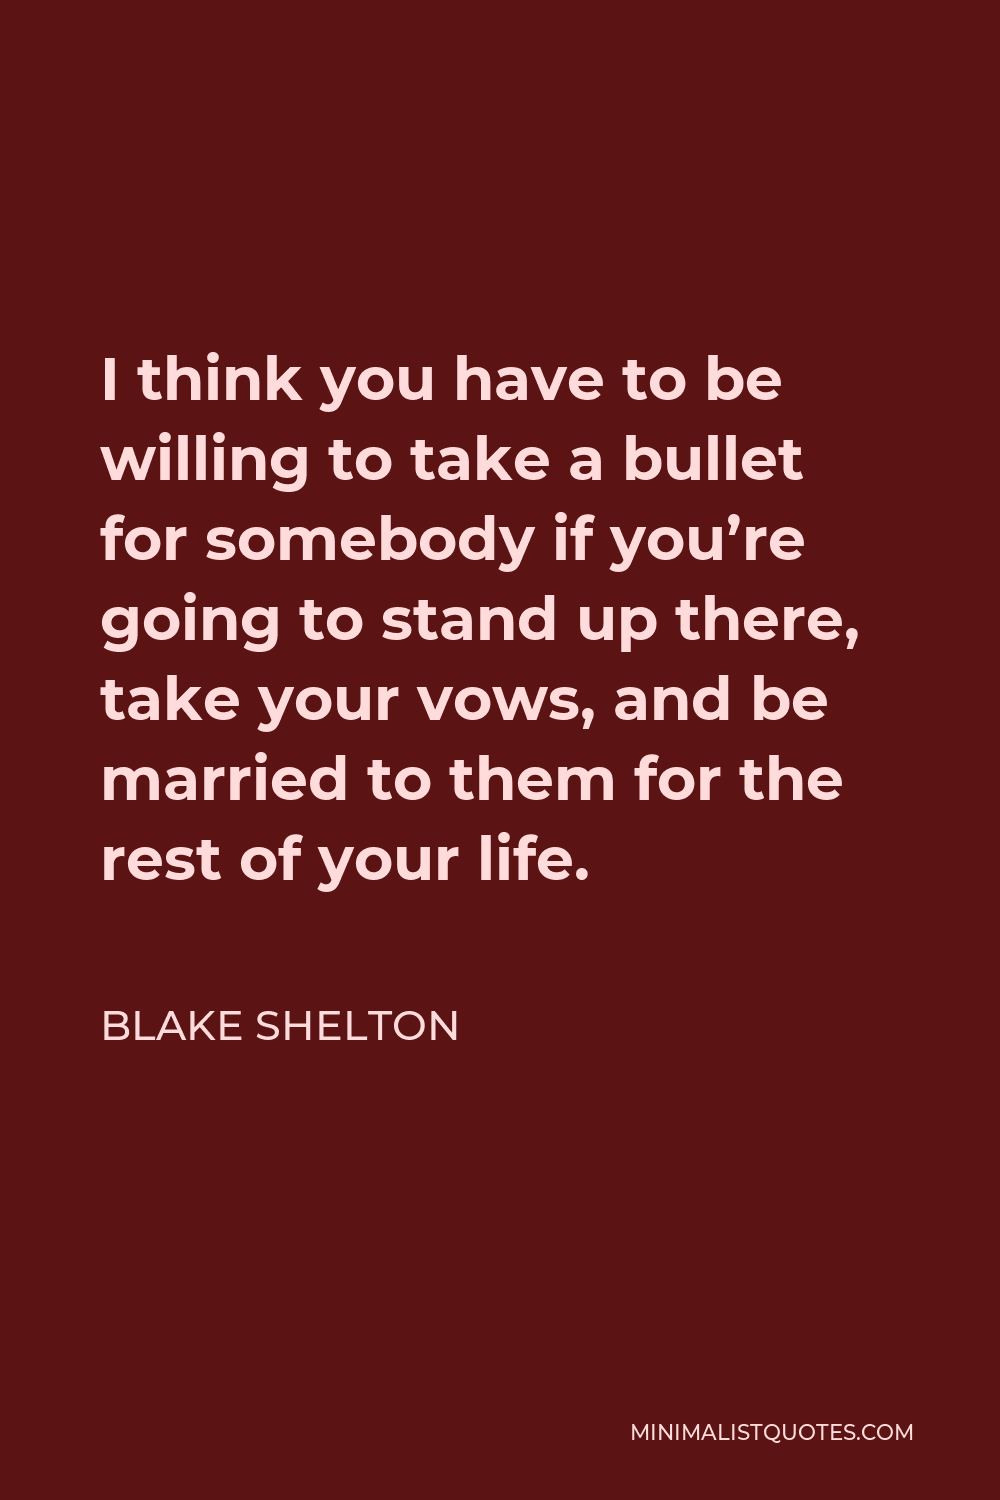 Blake Shelton Quote - I think you have to be willing to take a bullet for somebody if you’re going to stand up there, take your vows, and be married to them for the rest of your life.